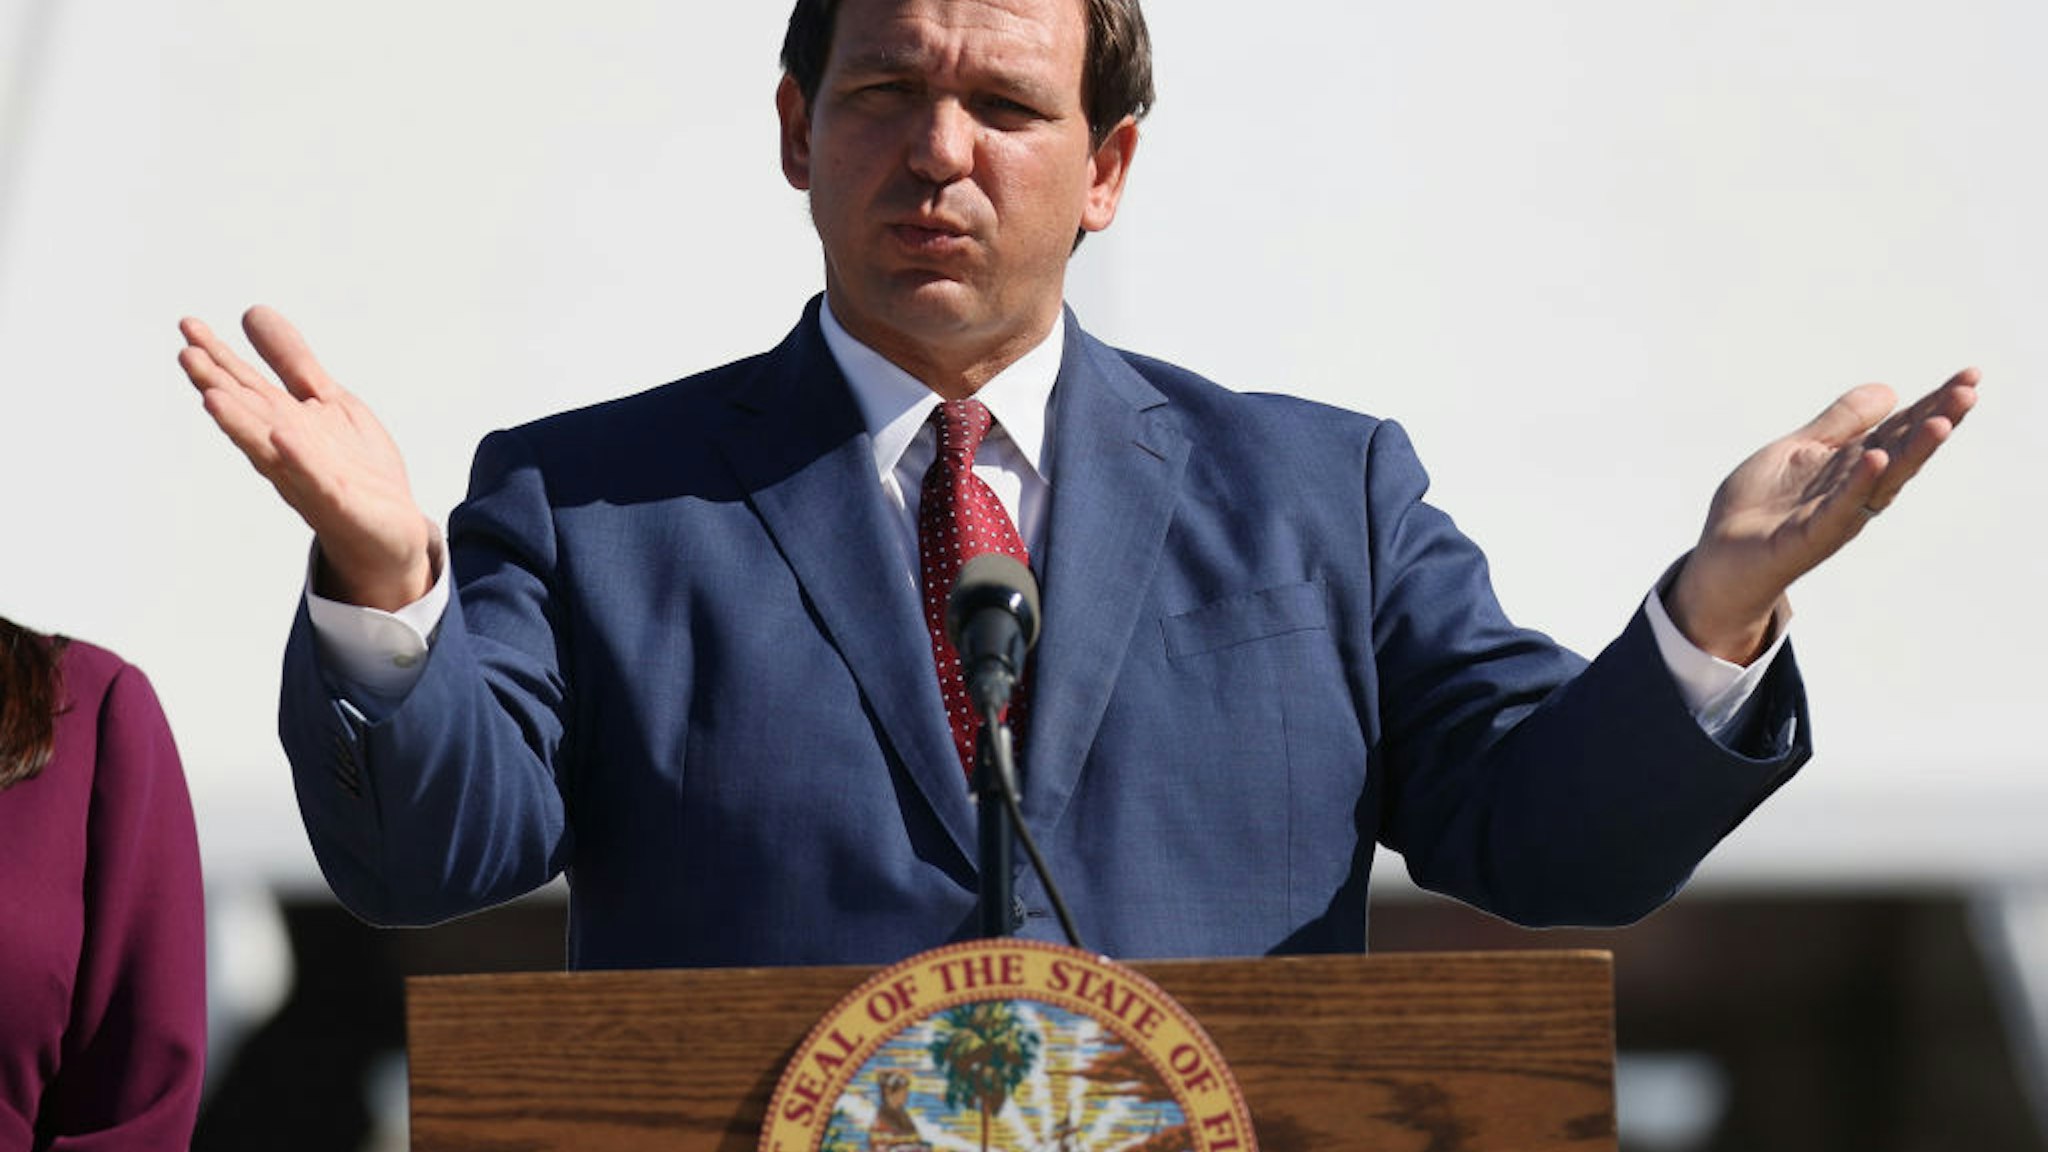 Florida Governor Ron DeSantis speaks during a press conference about the opening of a COVID-19 vaccination site at the Hard Rock Stadium on January 06, 2021 in Miami Gardens, Florida.